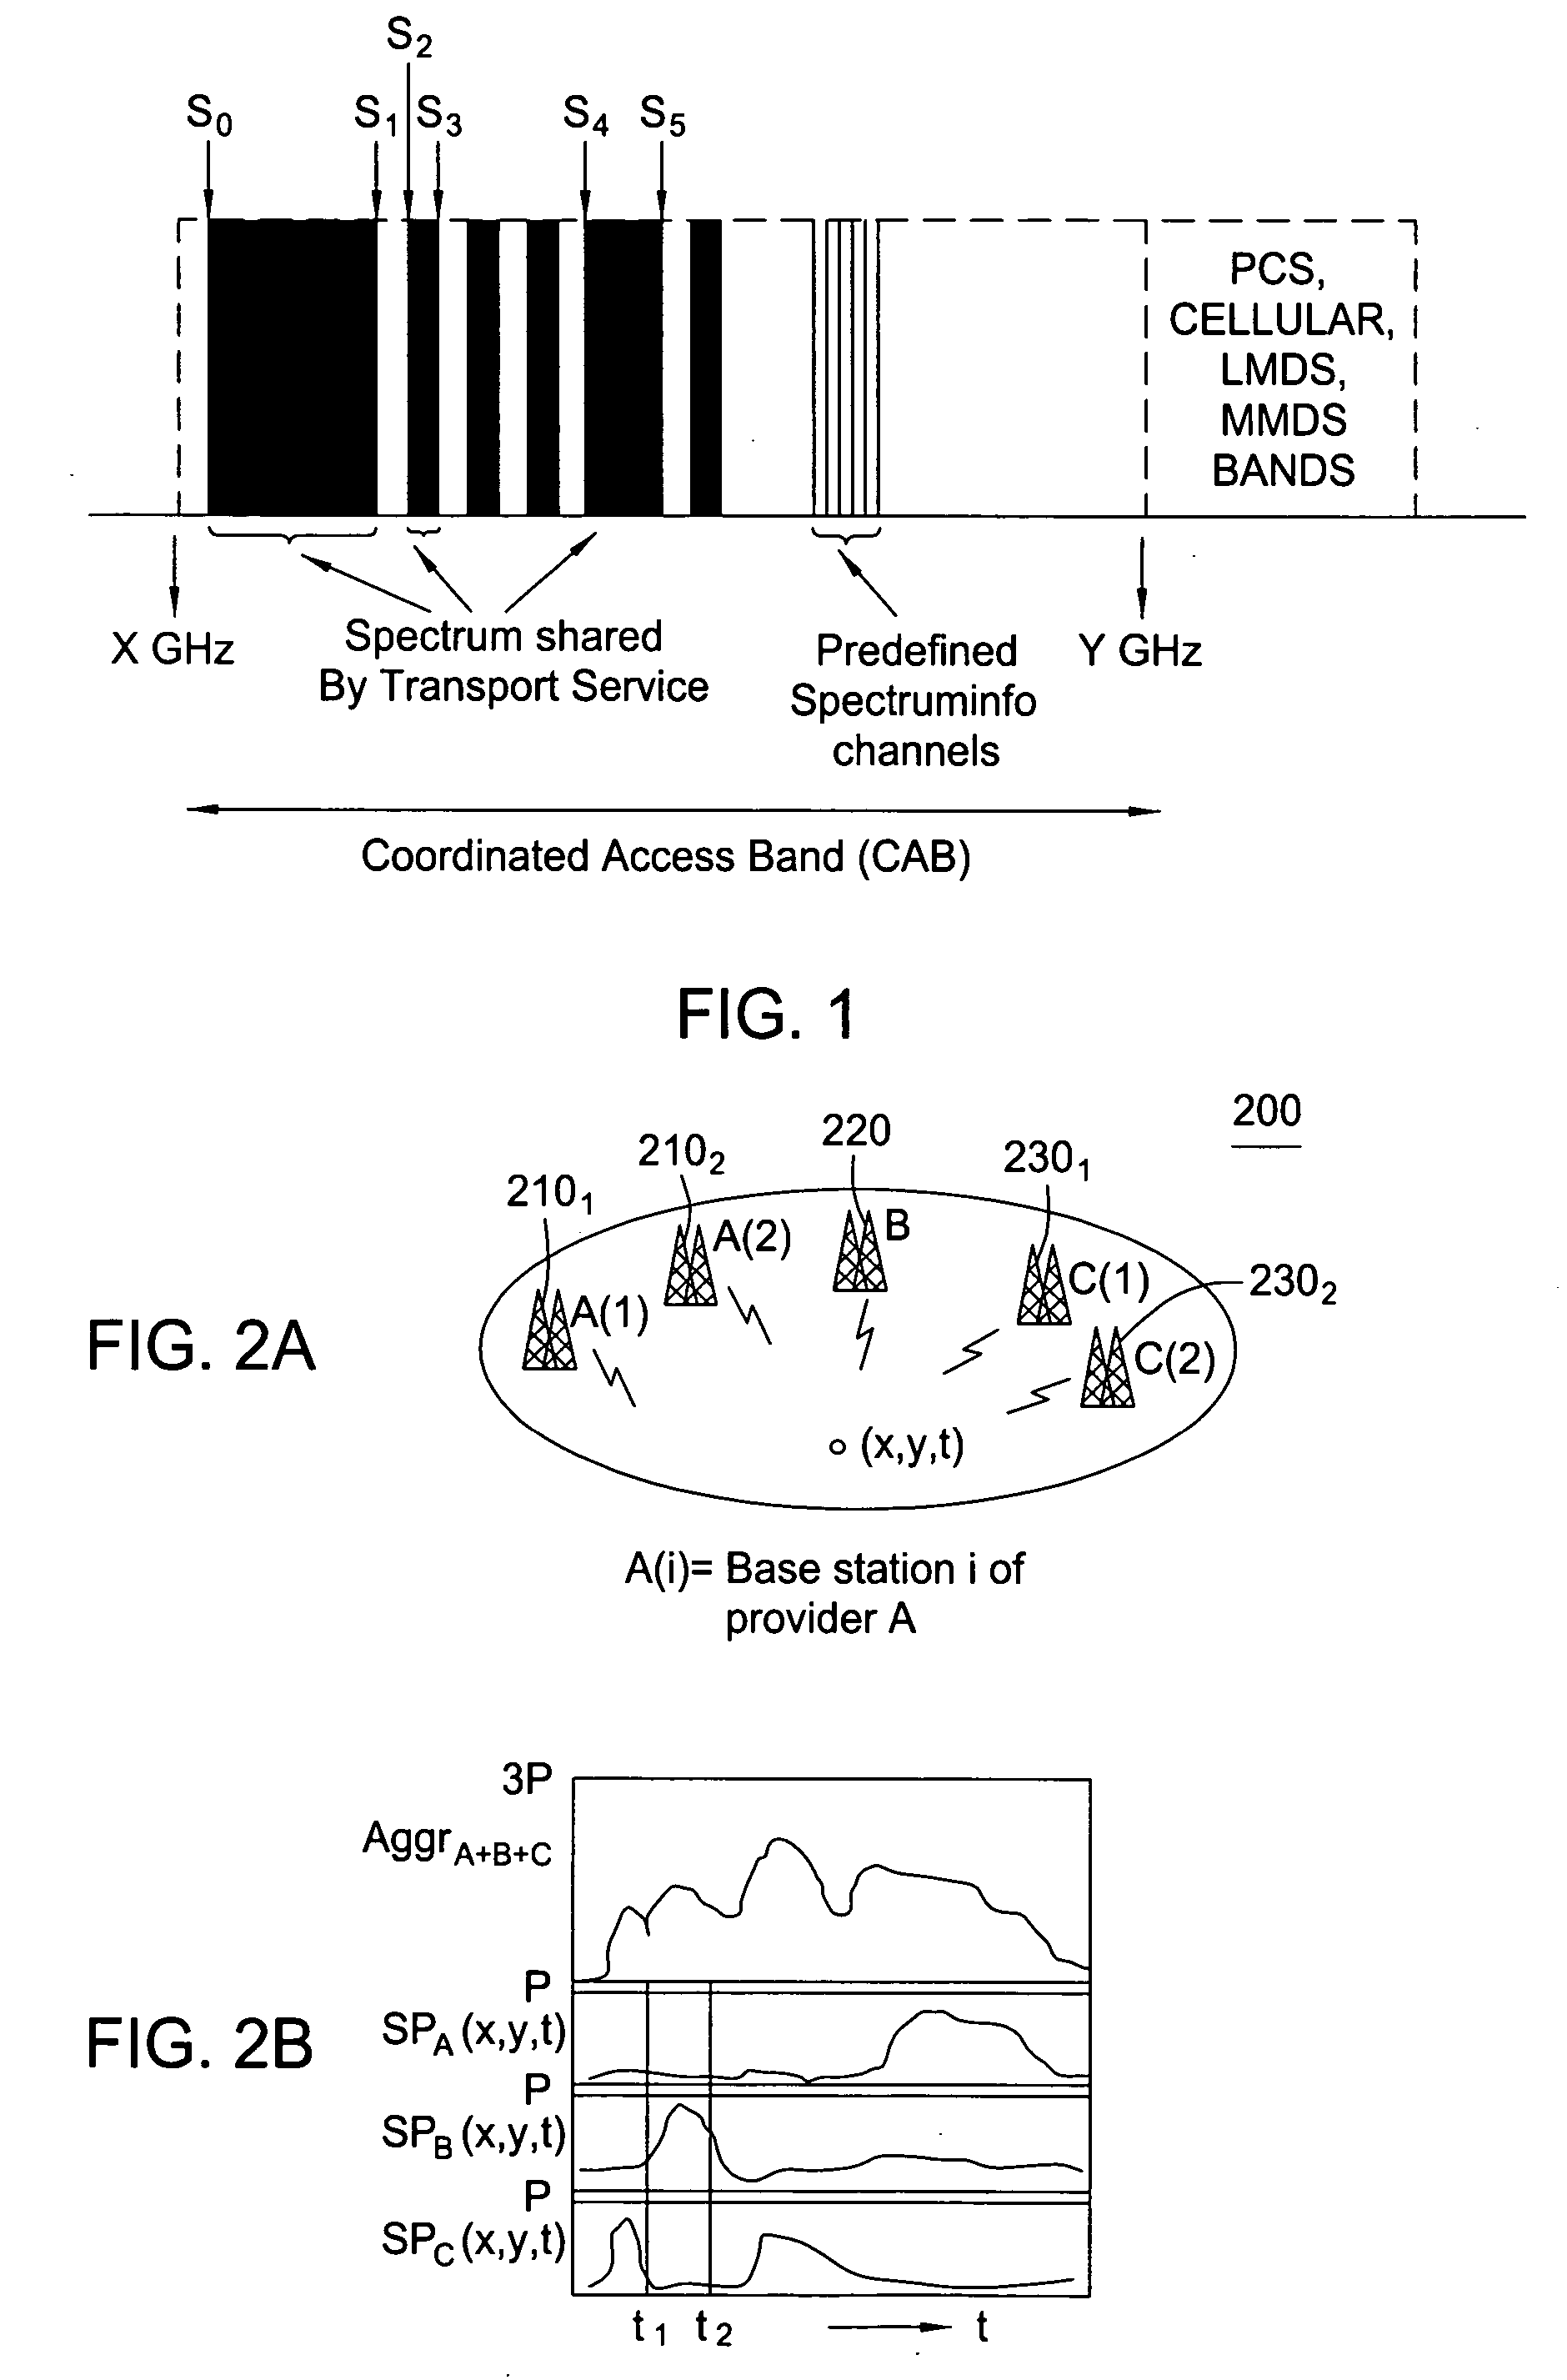 Method and system for wireless networking using coordinated dynamic spectrum access